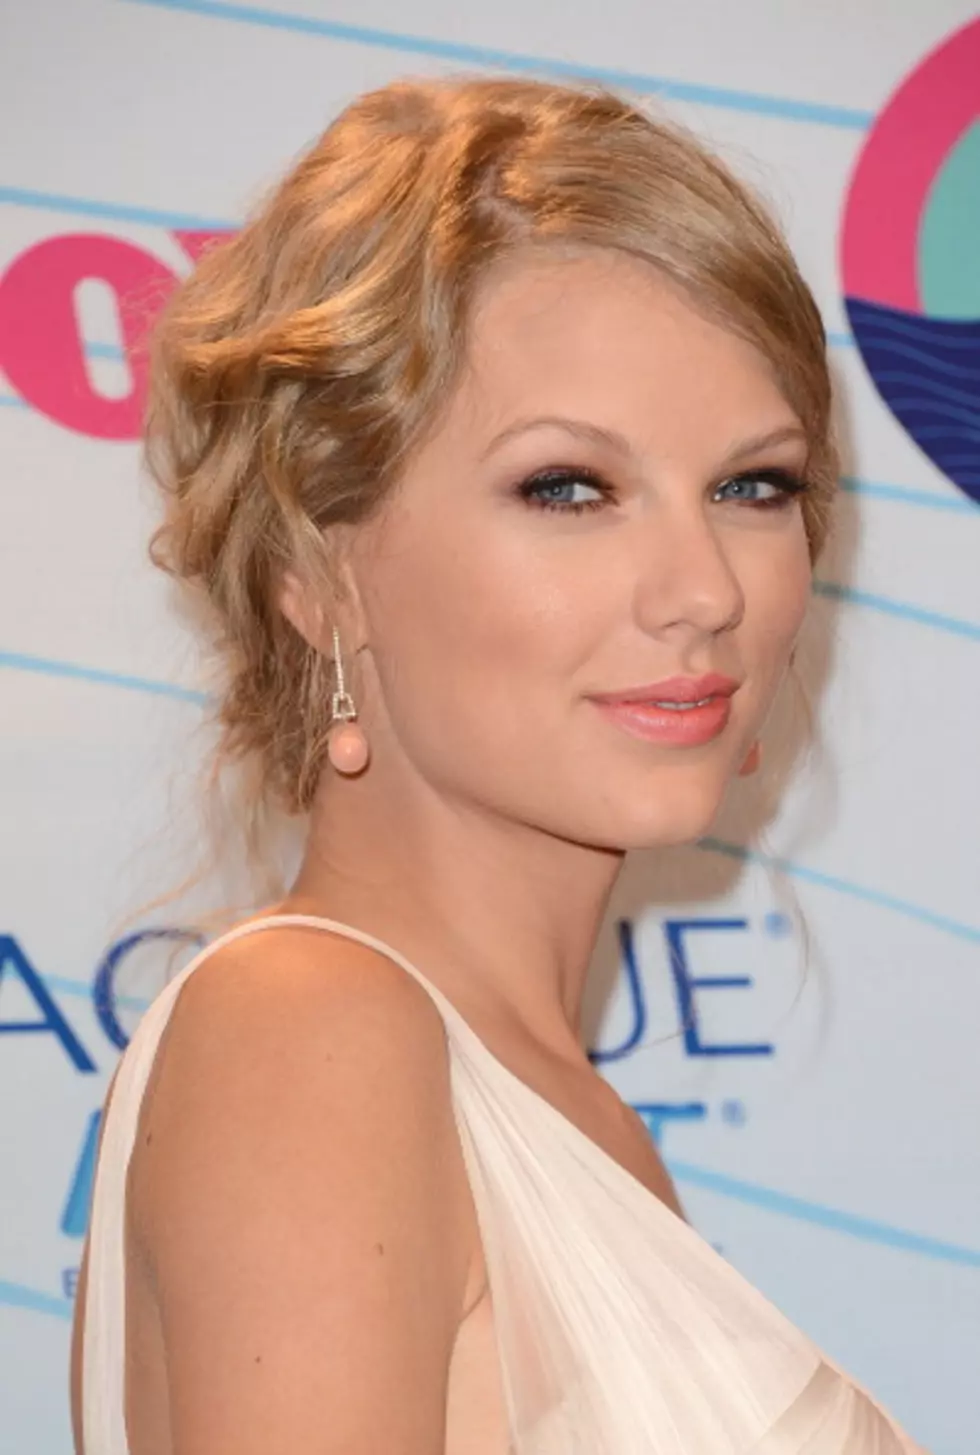 Taylor Swift Debuts New Song on the Daily Duel [AUDIO/POLL]